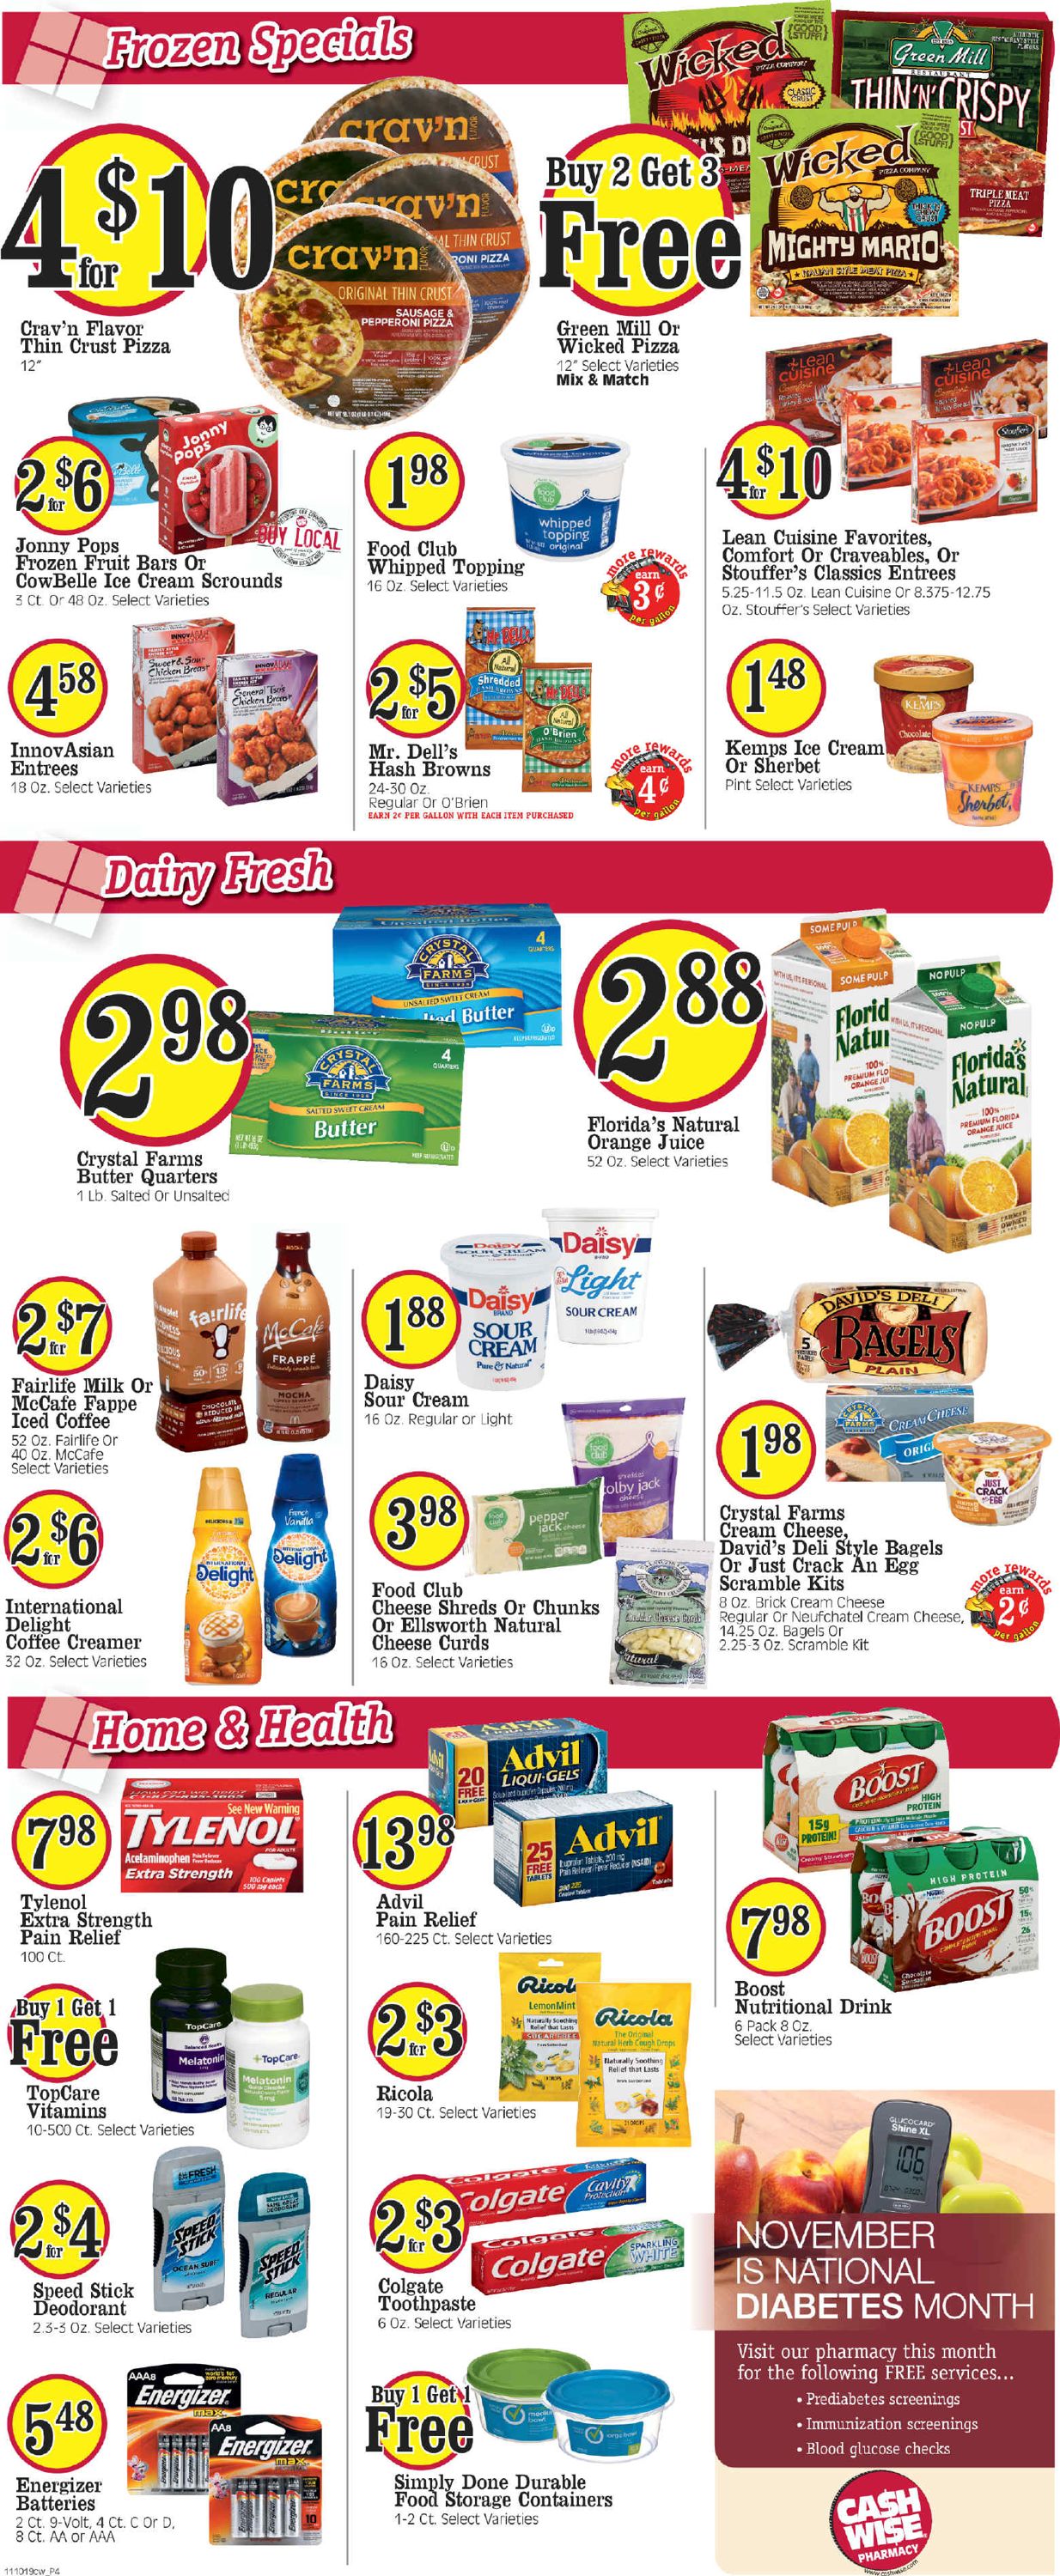 Cash Wise Weekly Ad Circular - valid 11/10-11/16/2019 (Page 4)